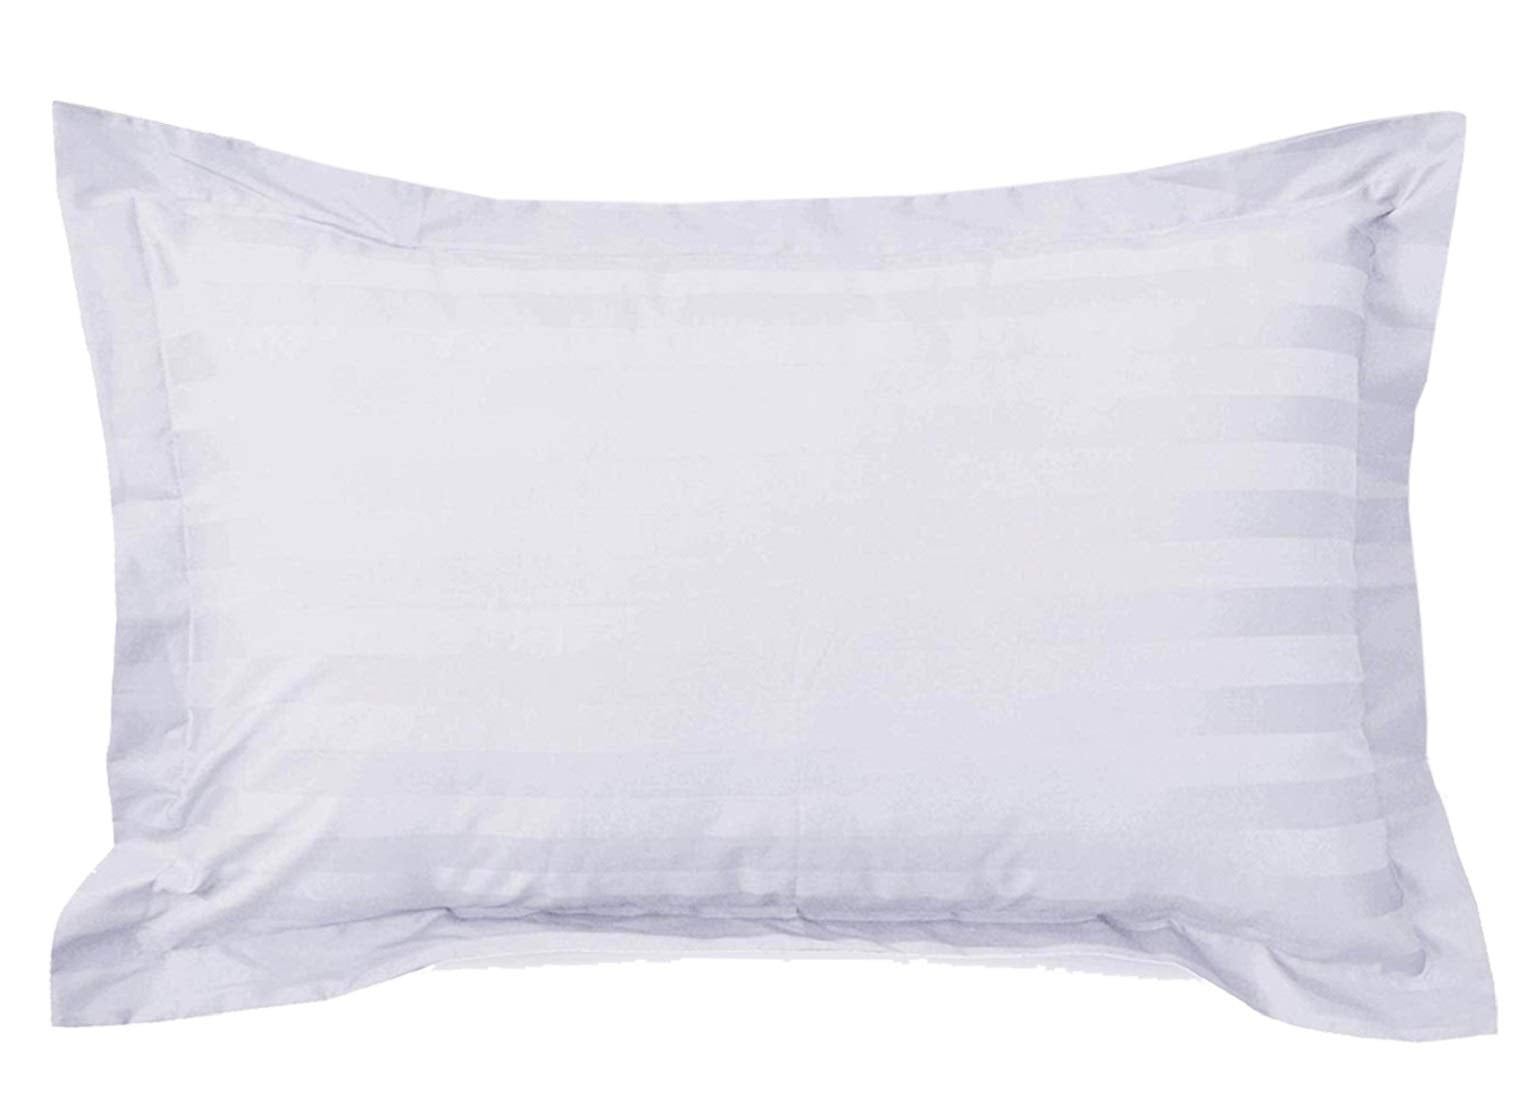 Kuber Industries 2 Pieces Cotton Luxurious Pillow Cover|Ultra Soft Satin Striped Pillow Case|Breathable & Wrinkle Free|Pack of 2 (White)-CTKTC040309, 200 TC